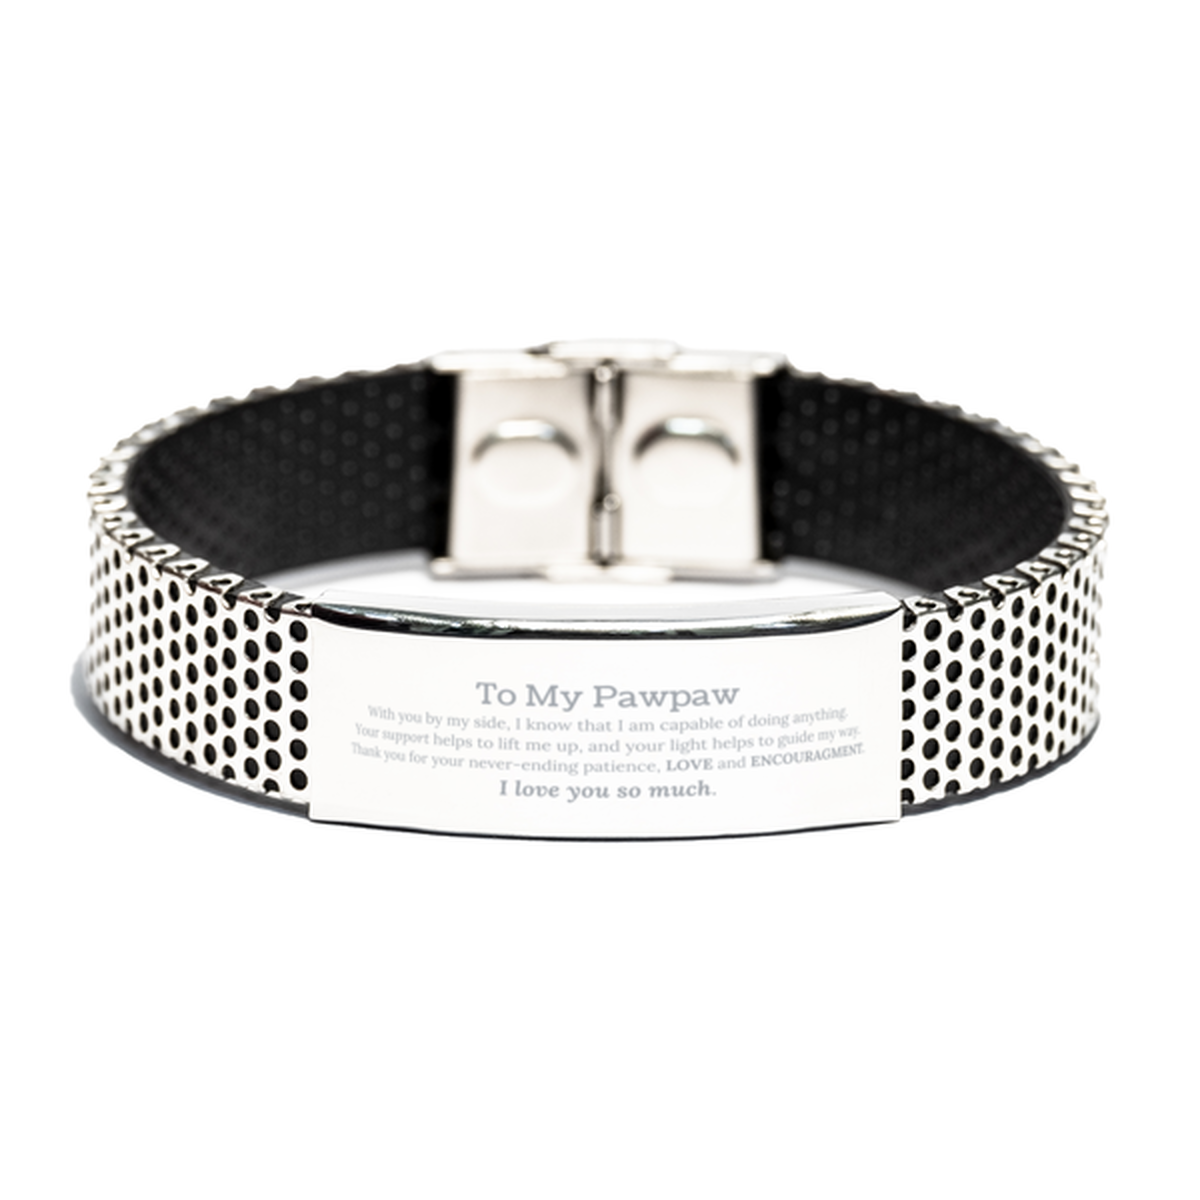 Appreciation Pawpaw Stainless Steel Bracelet Gifts, To My Pawpaw Birthday Christmas Wedding Keepsake Gifts for Pawpaw With you by my side, I know that I am capable of doing anything. I love you so much